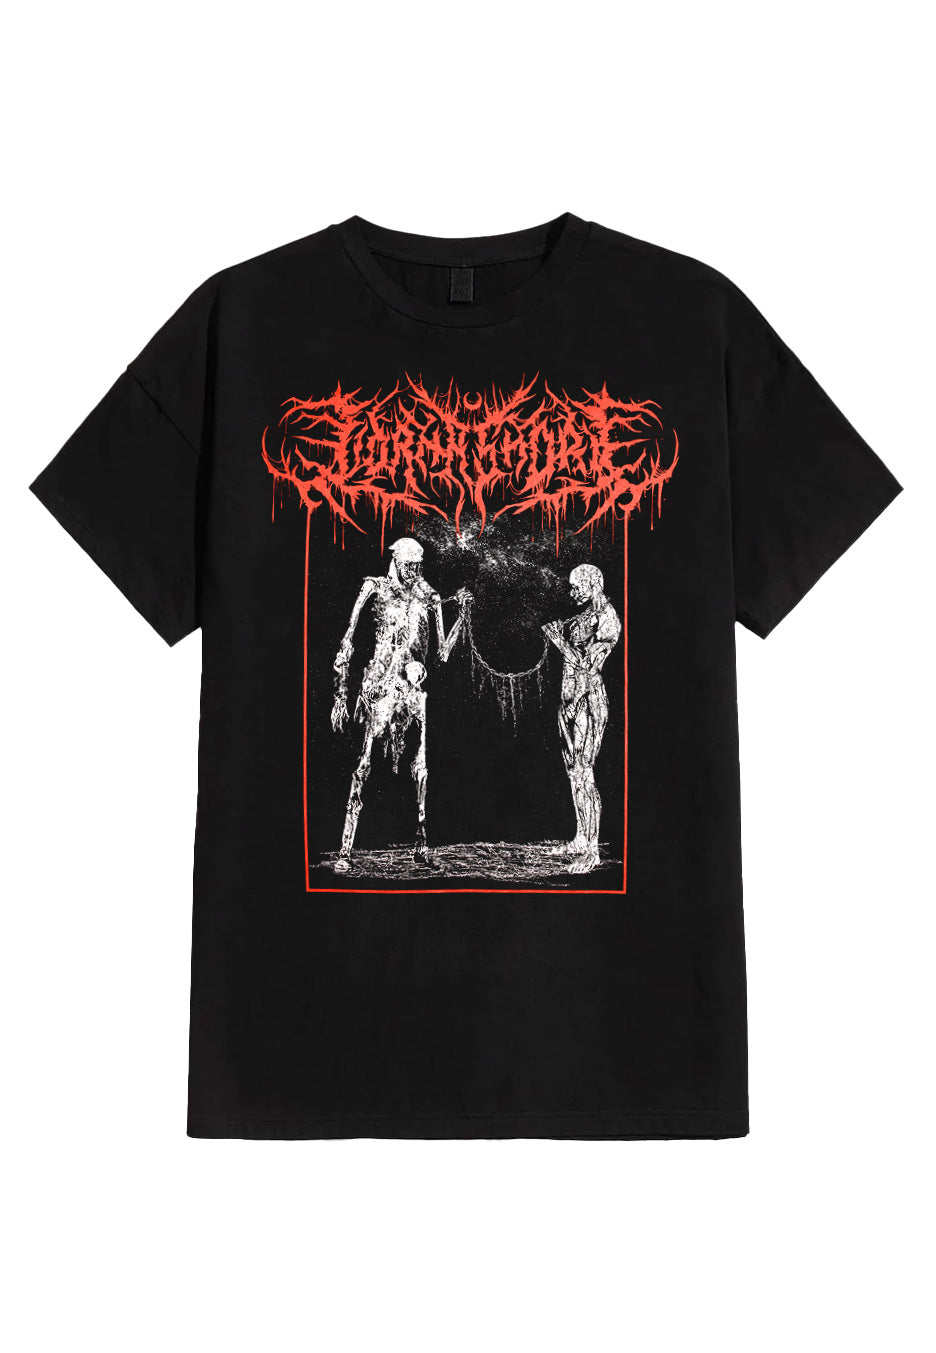 Lorna Shore - In Chains - T-Shirt | Neutral-Image